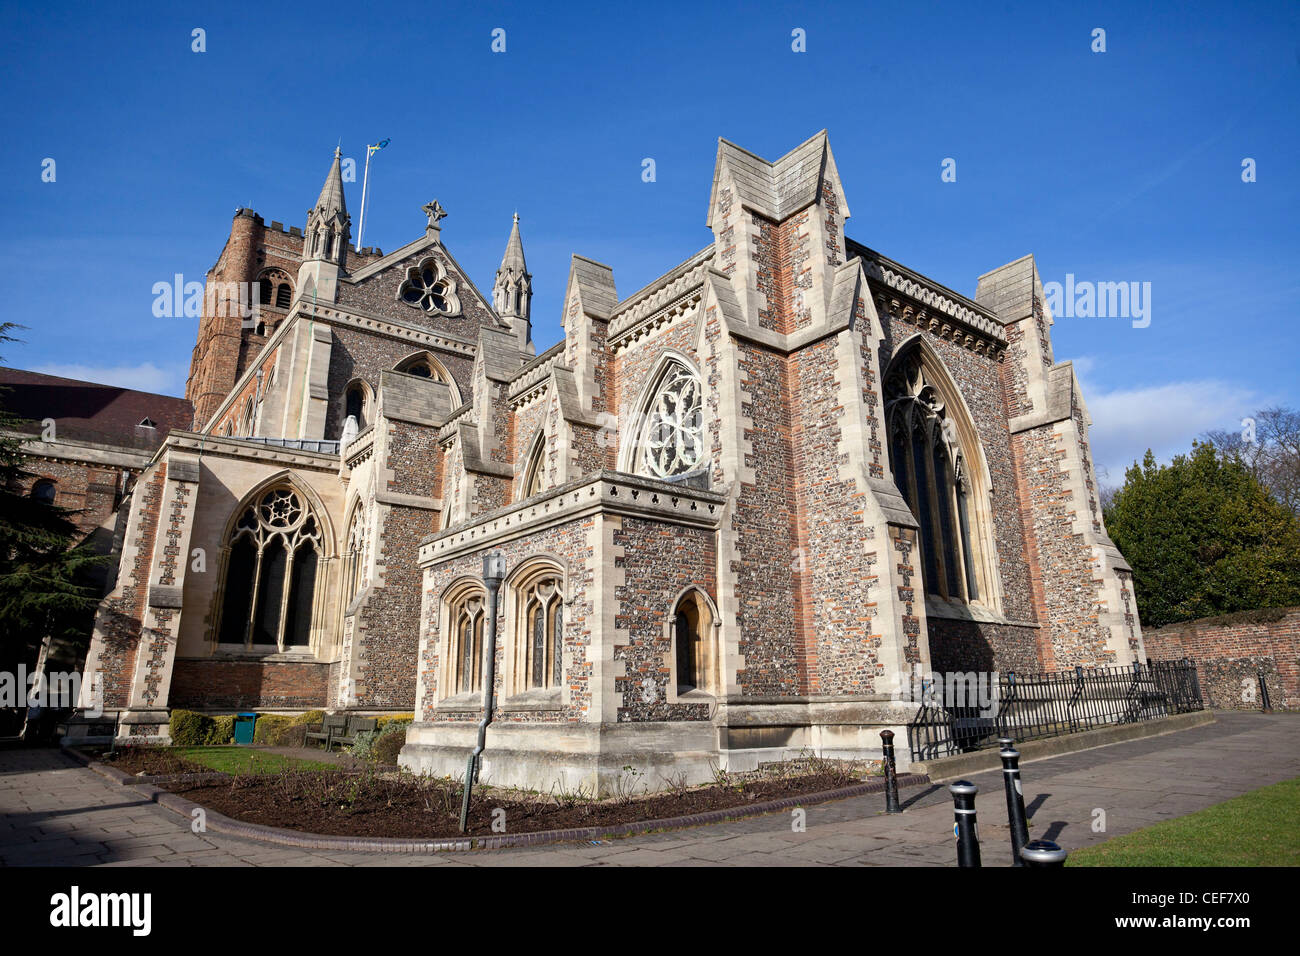 The Cathedral and Abbey Church of St Alban, Hertfordshire, England, UK Stock Photo